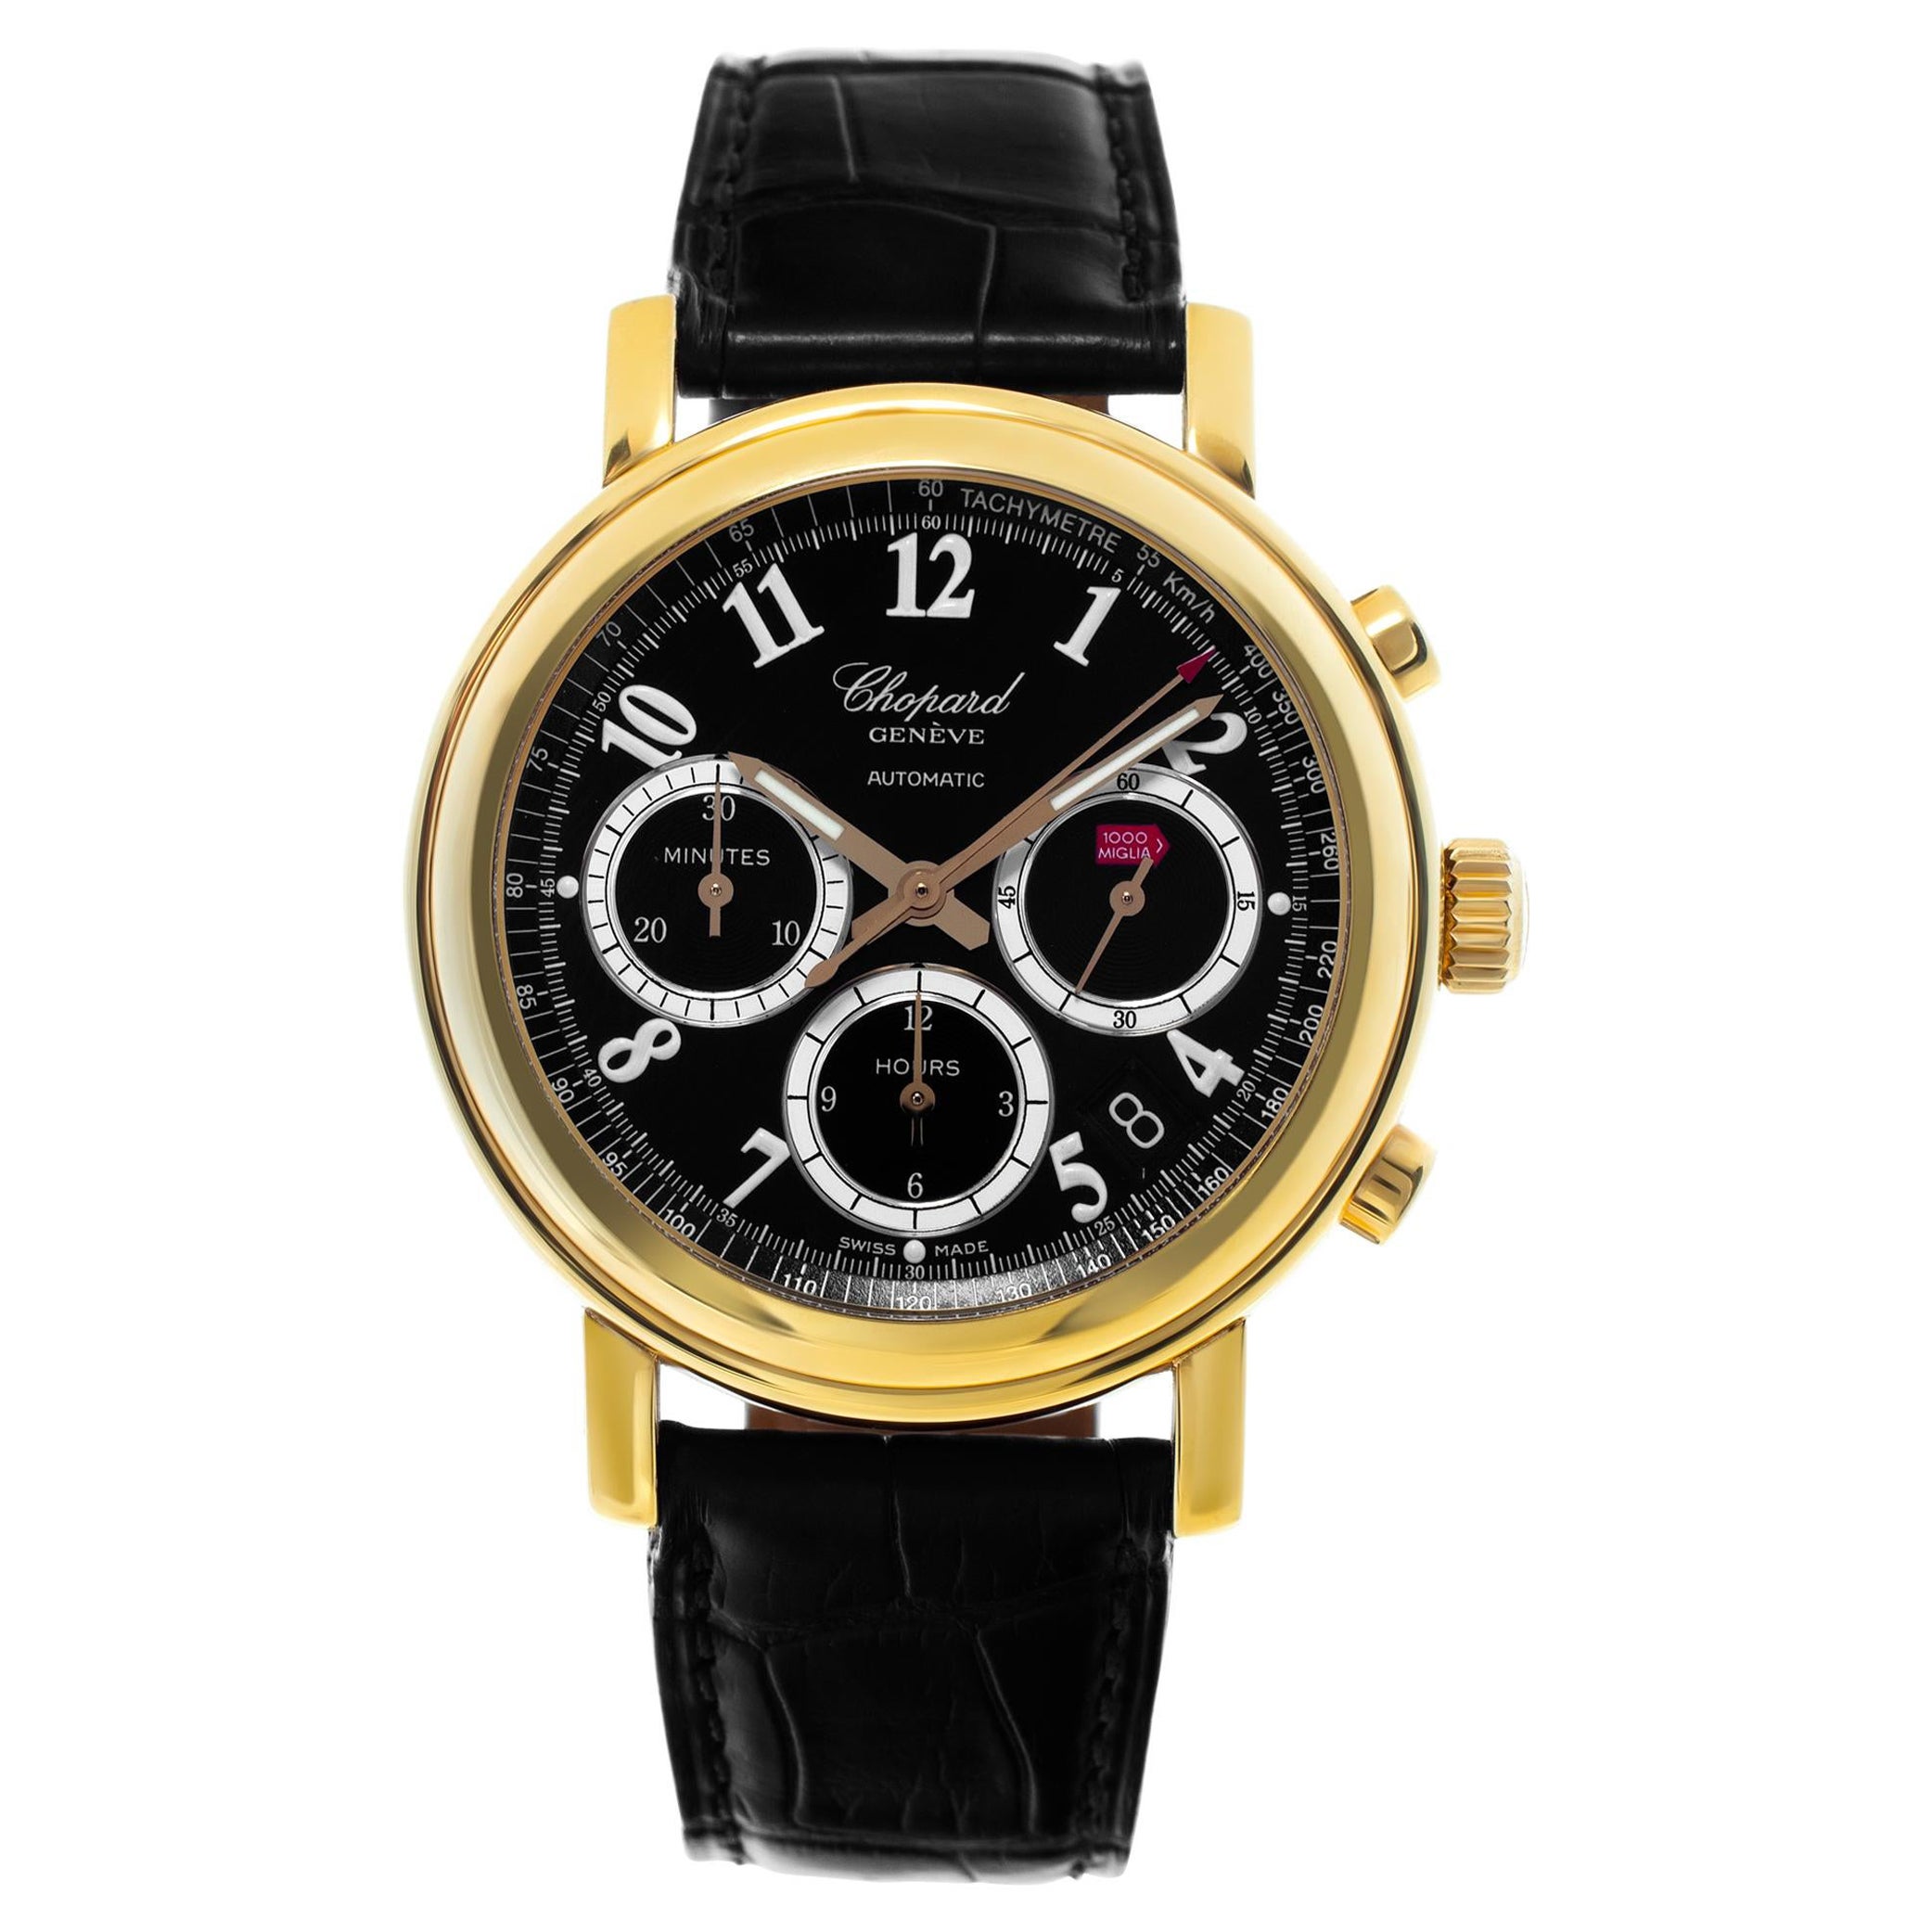 Chopard Mille Miglia 18k yellow gold Automatic Wristwatch Ref 161250 0001 For Sale